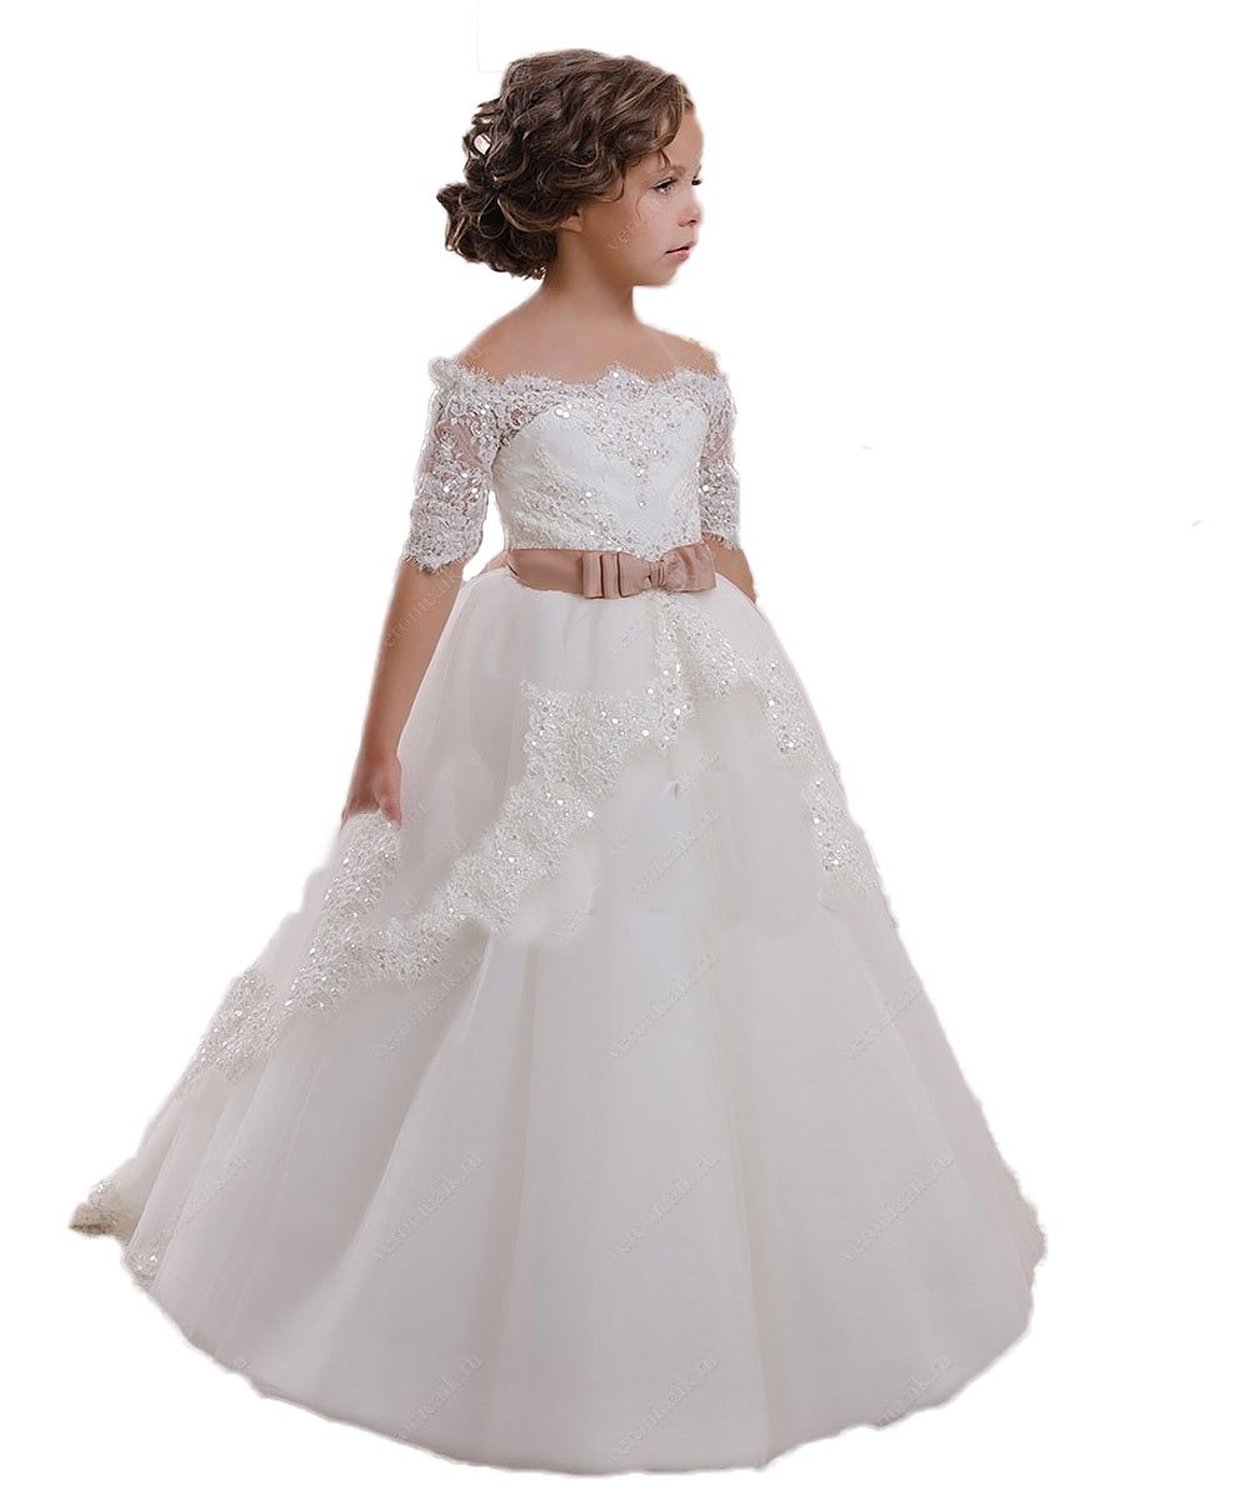 White Ivory Flower Girl Dresses Off Shoulder Lace Appliqued With Sash Girl Pageant Party Dresses First Communion Gowns